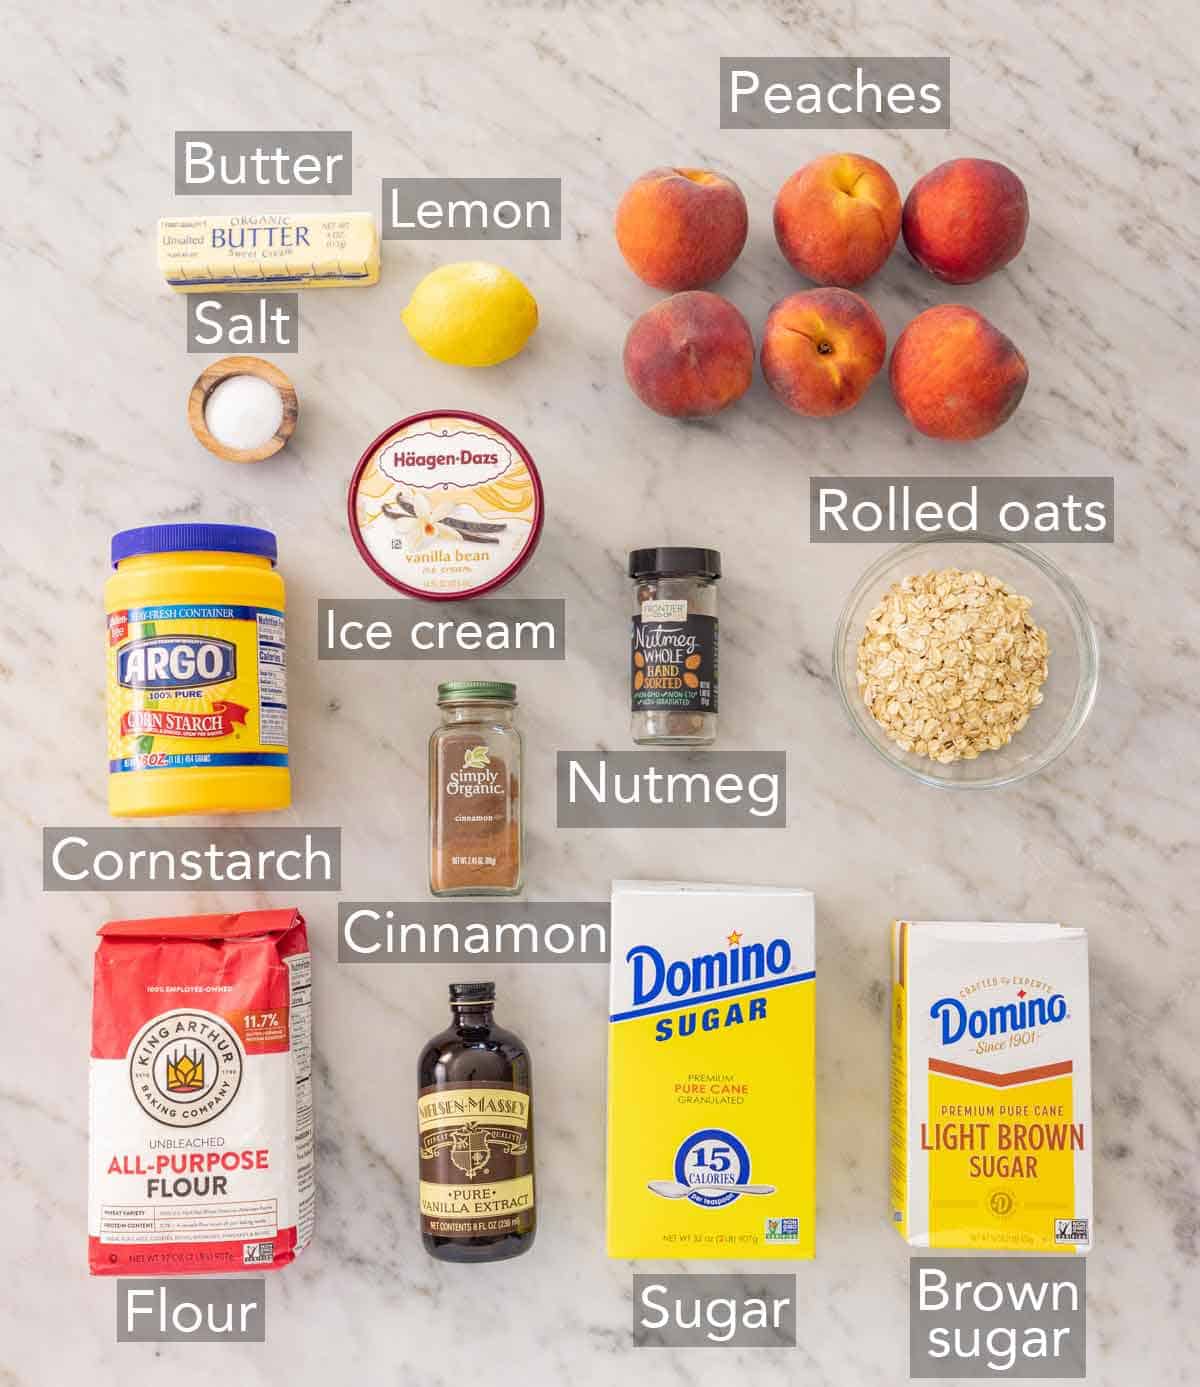 Ingredients needed to make a peach crisp.